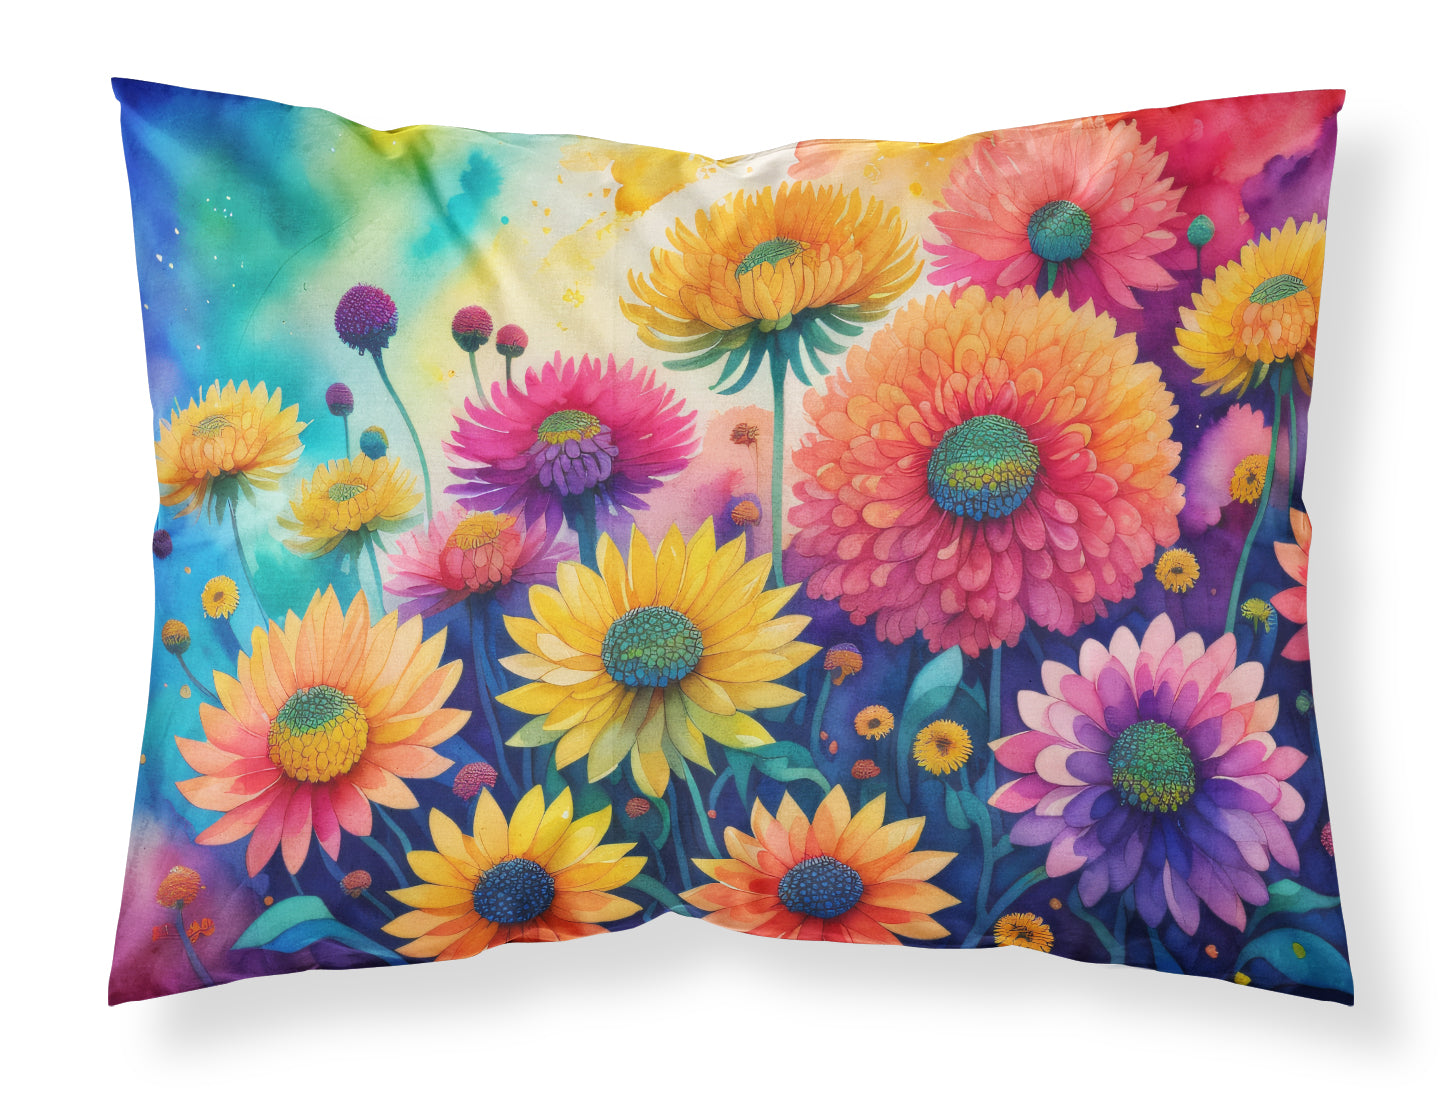 Buy this Chrysanthemums in Color Fabric Standard Pillowcase